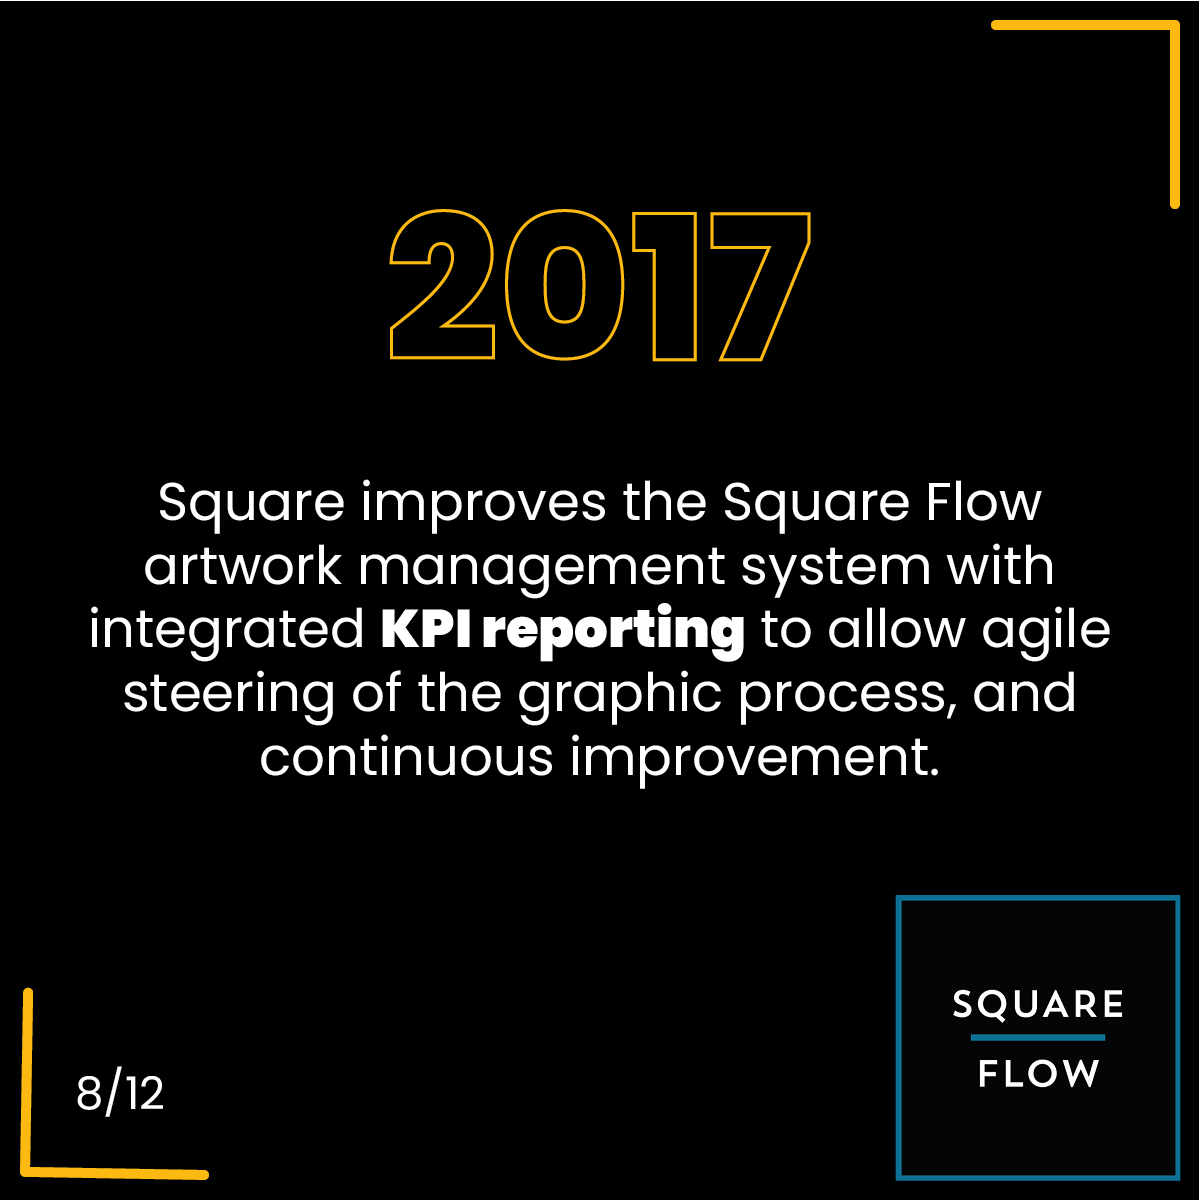 2017, Square improves the Square Flow artwork management system with integrated KPI reporting to allow agile steering of the graphic process, and continuous improvement.